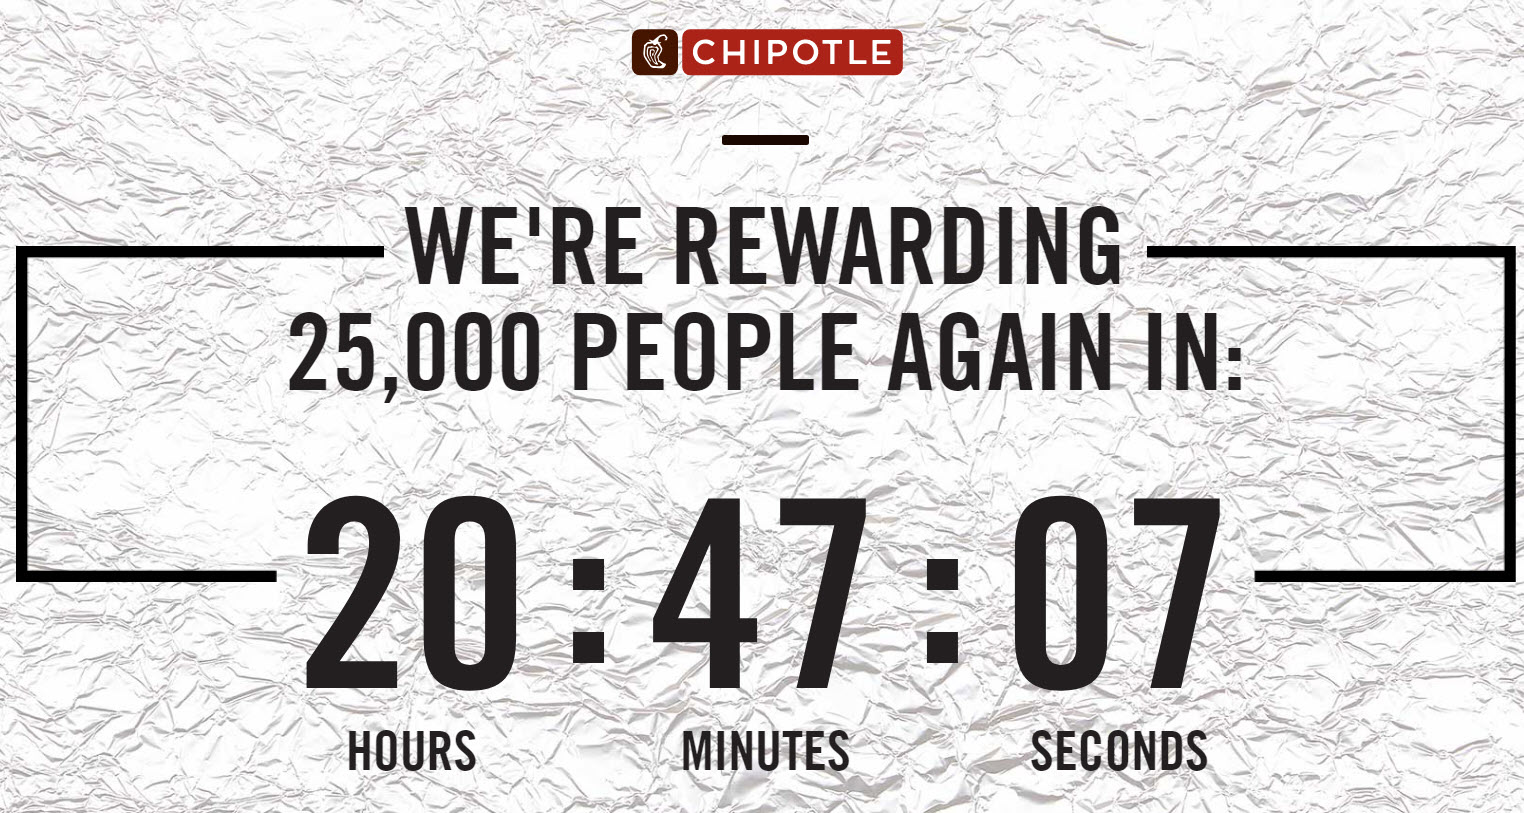 Chipotle is giving away FREE Venmo Cash everyday through March 15th. You need to be quick to grab your share. You have a new chance to win each day!